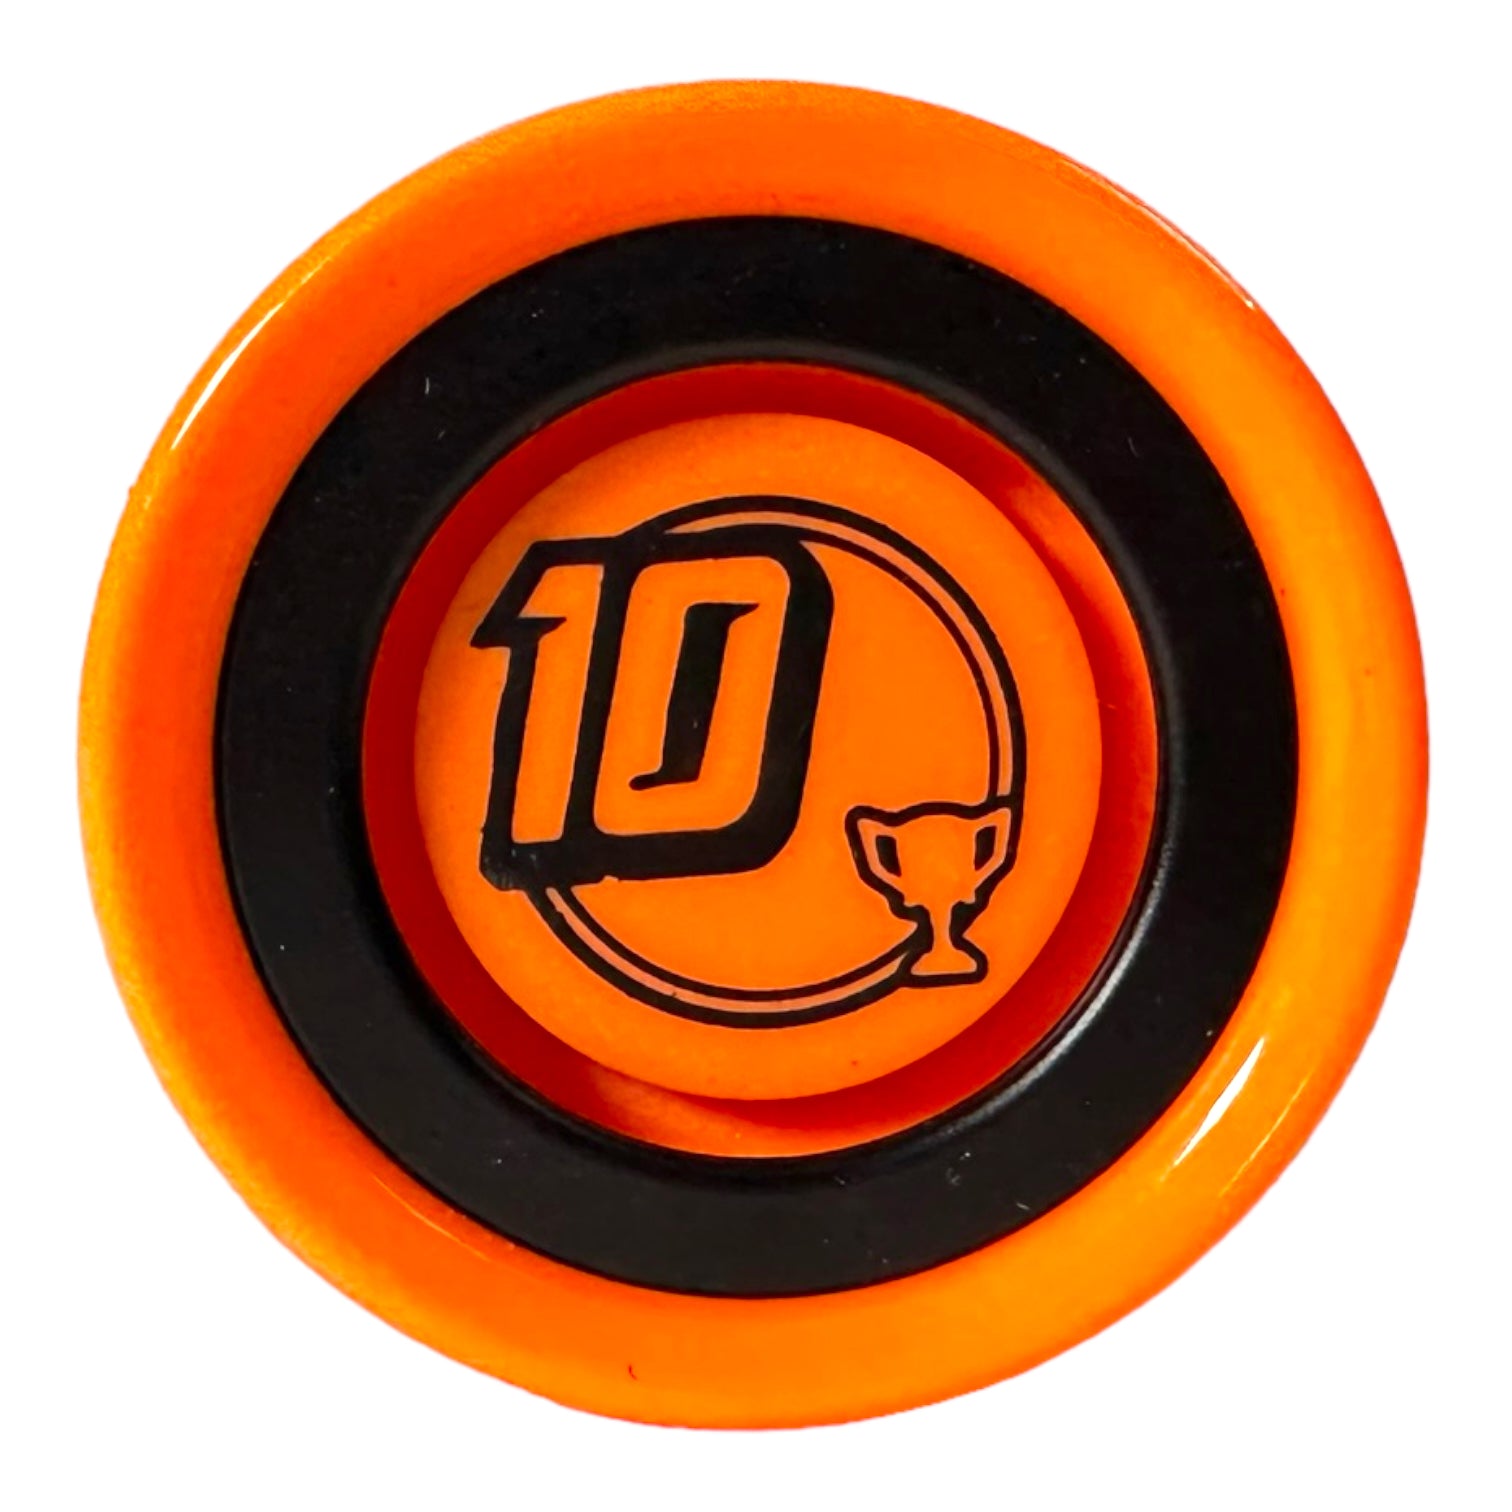 Yoyo toy isolated icon Royalty Free Vector Image